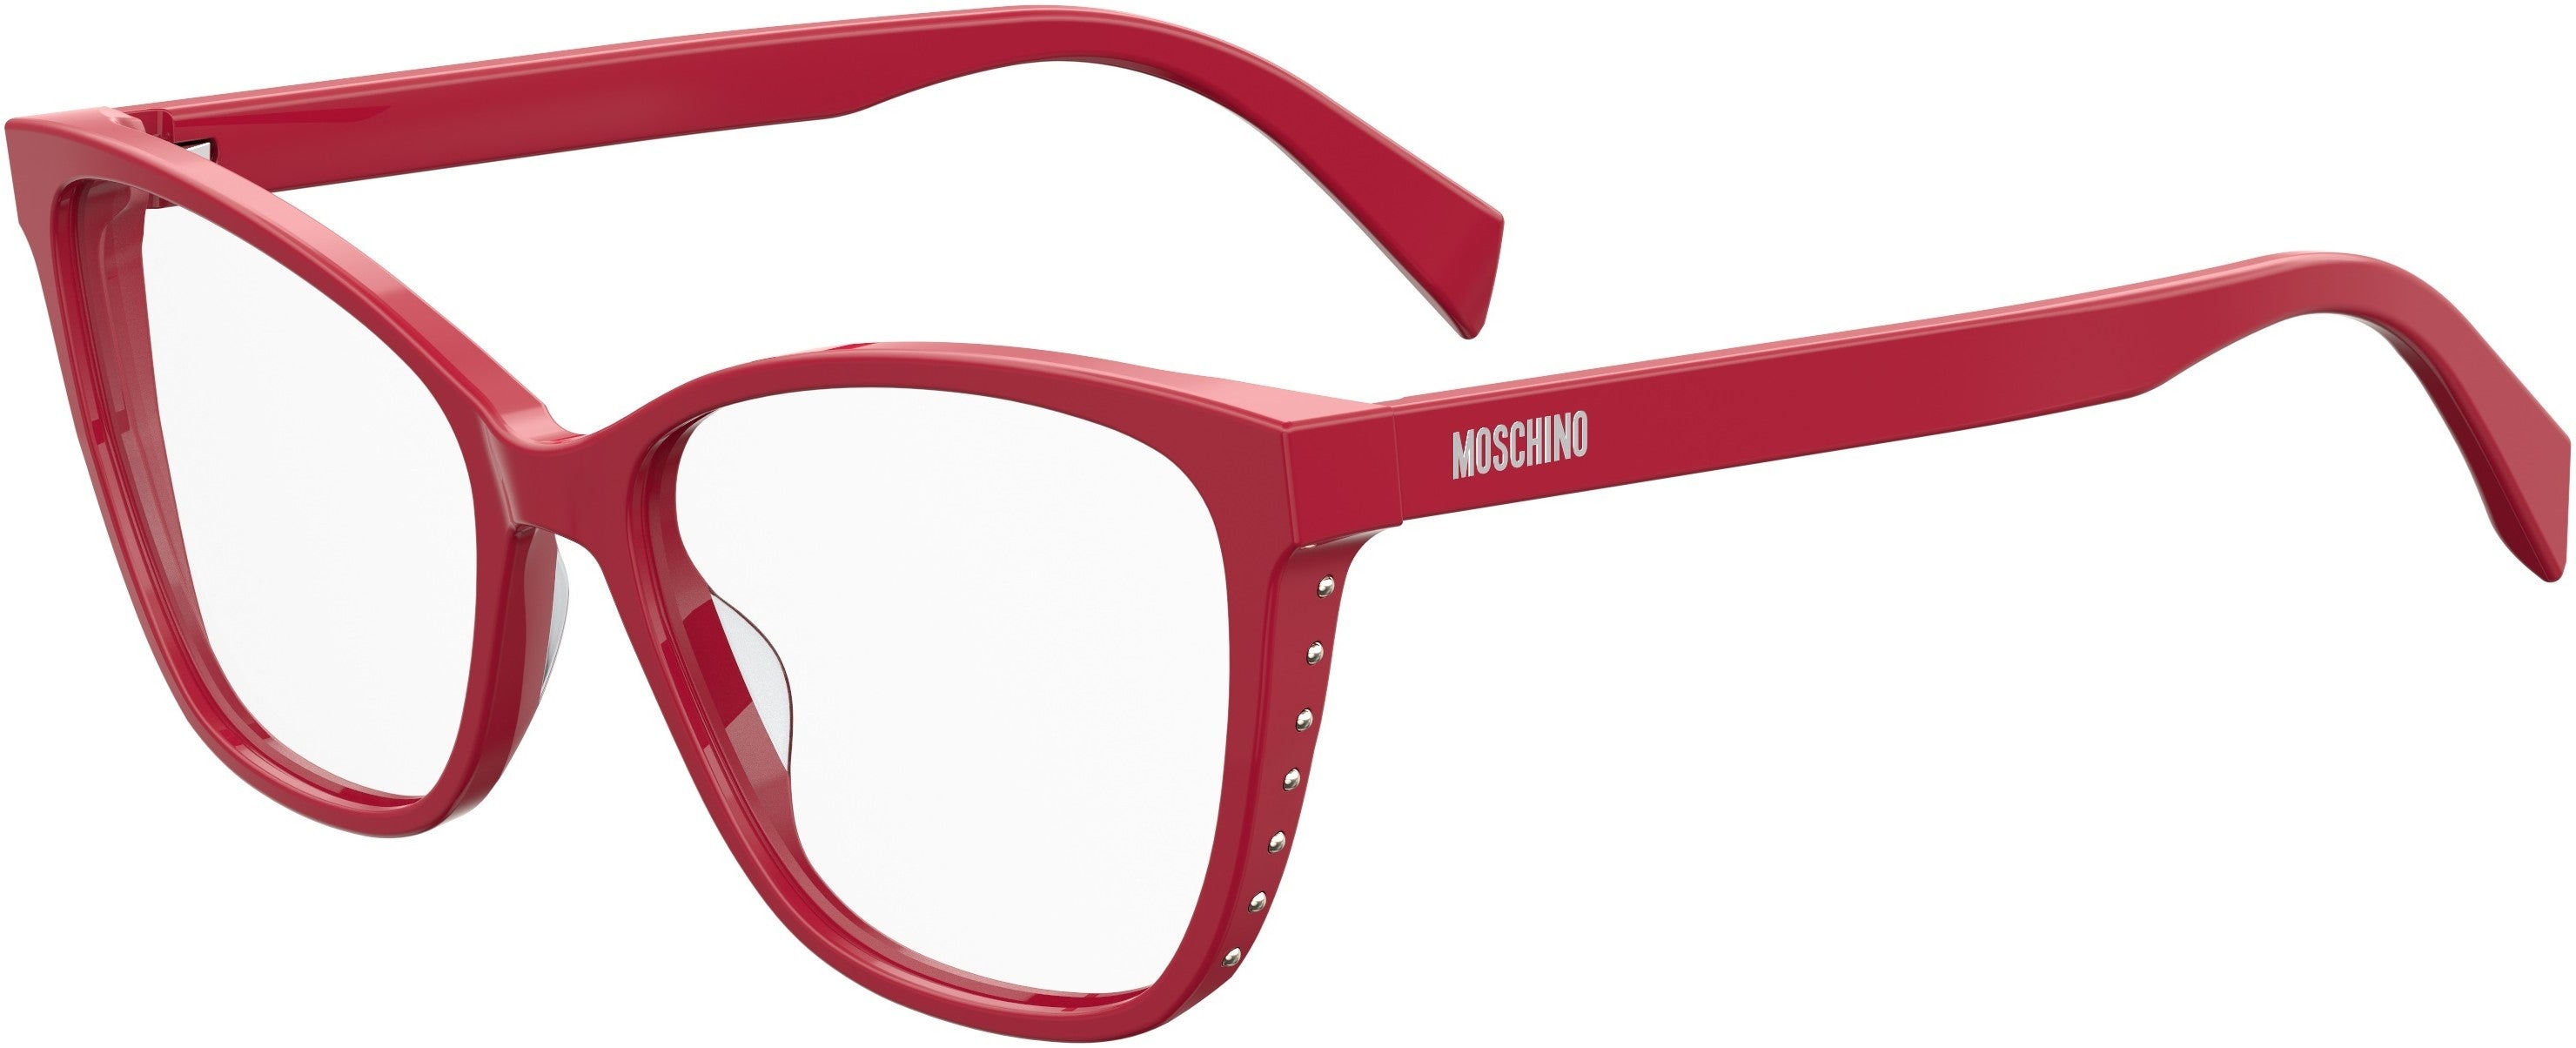  Moschino 550 Cat Eye/butterfly Eyeglasses 0C9A-0C9A  Red (00 Demo Lens)